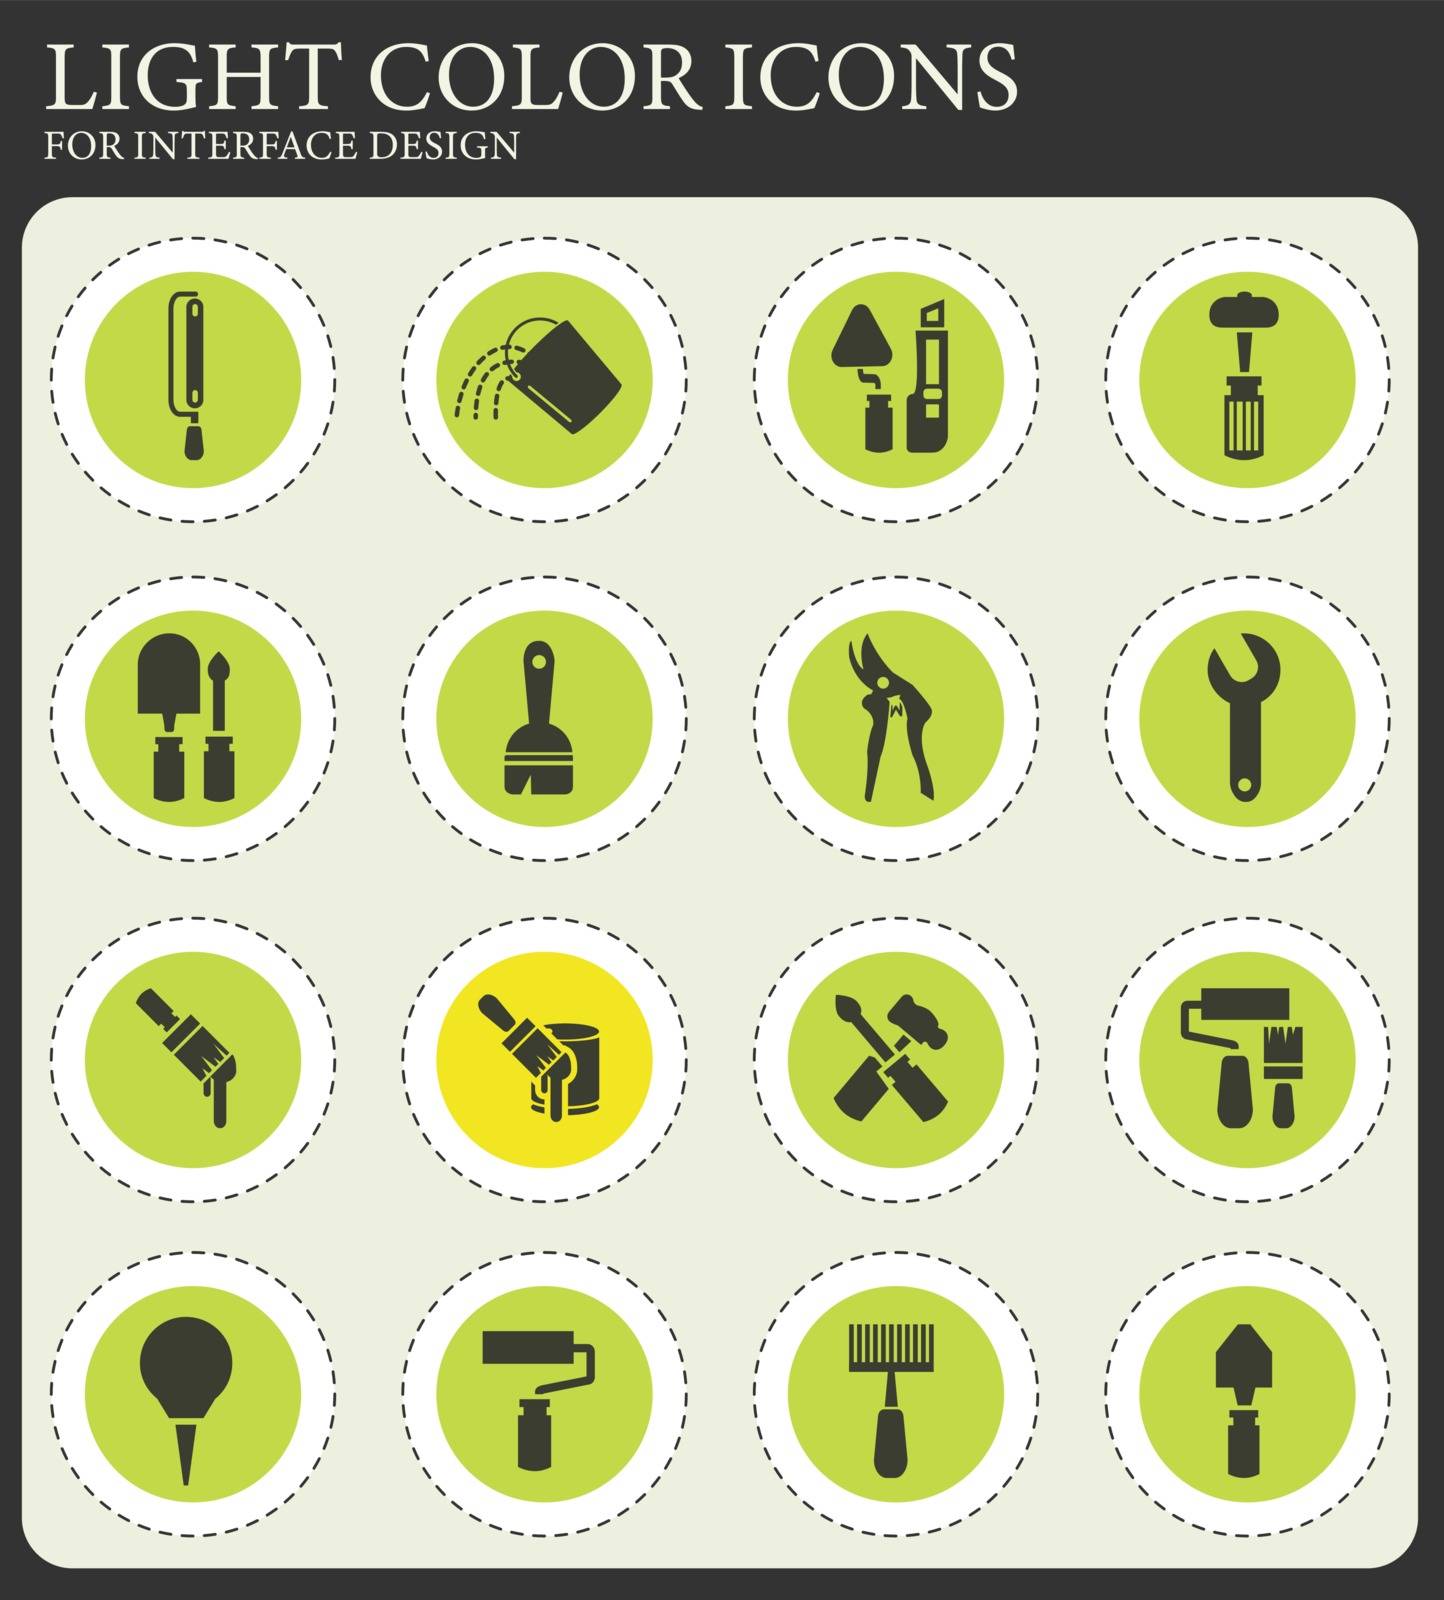 Work tools icon set for web sites and user interface